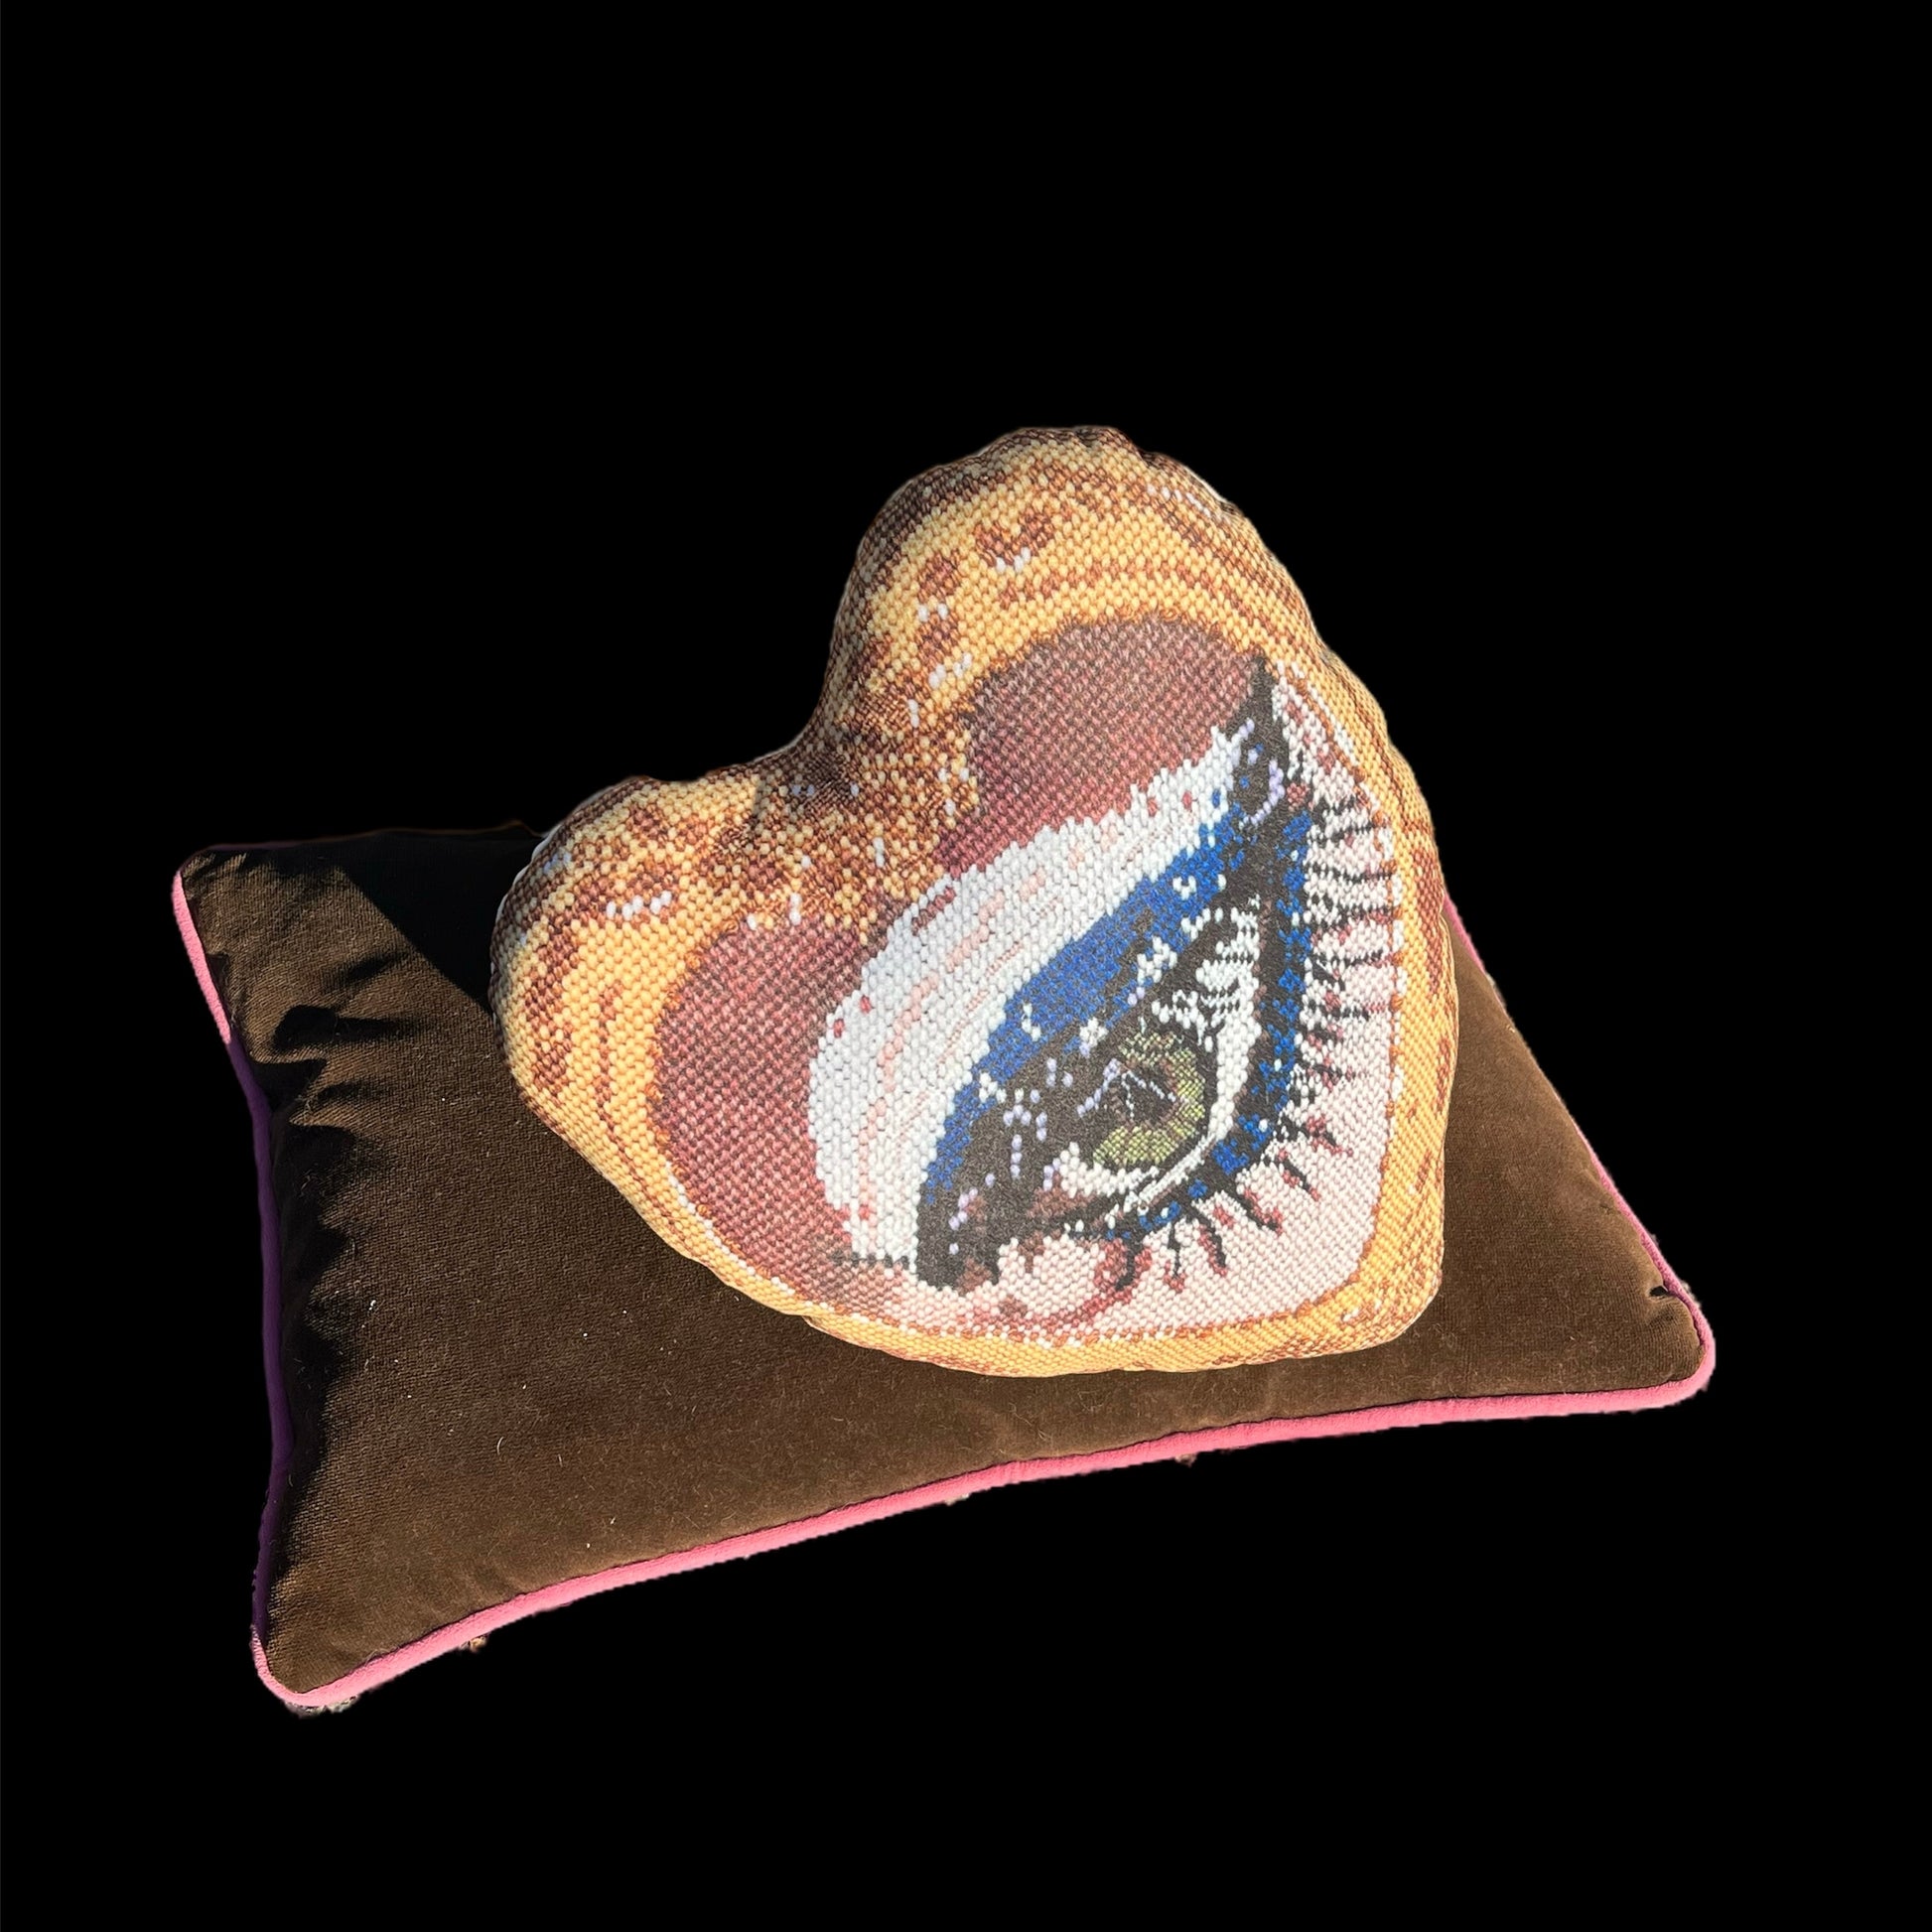 Mommani Threads x Haricot Vert "Heartfelt Glimpse" pillow is shaped like a heart and features a sultry green eye inside a gold frame.